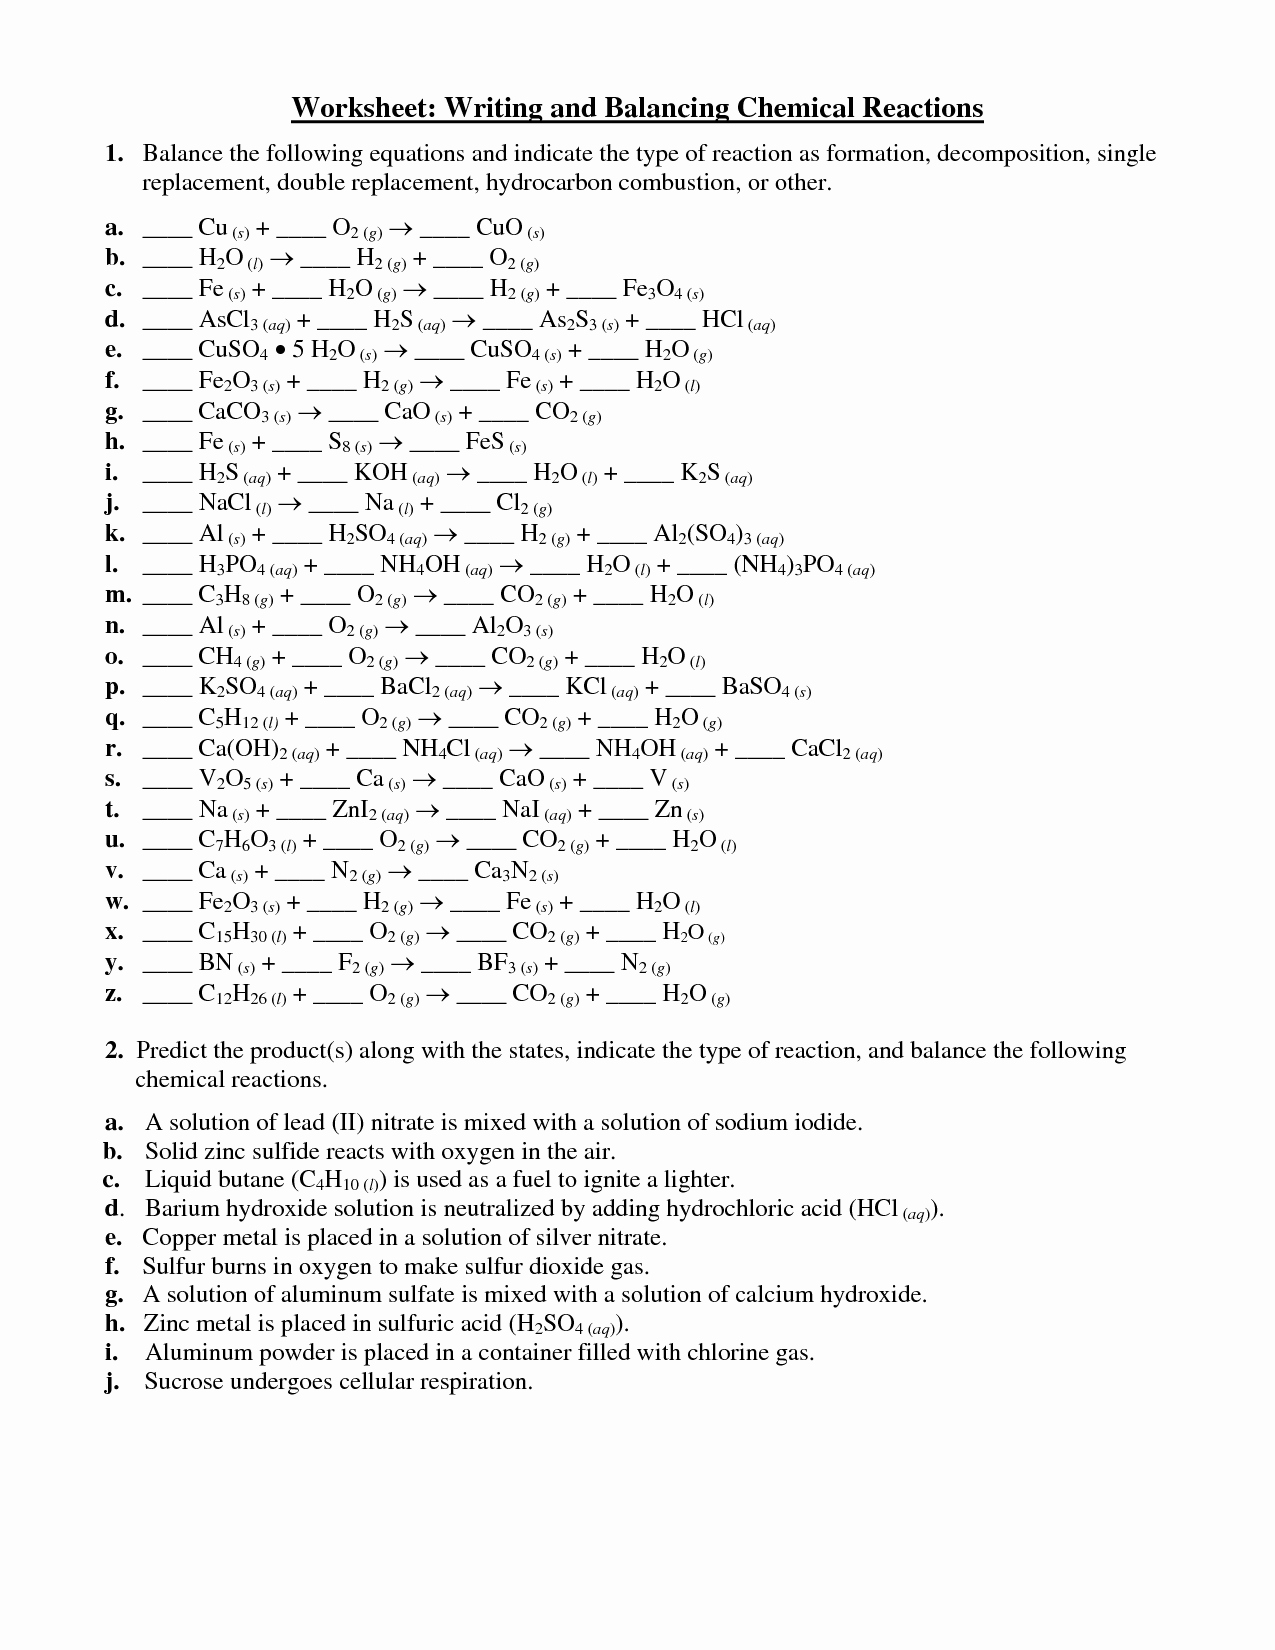 Classifying Chemical Reactions Worksheet Answers Luxury 16 Best Of Types Chemical Reactions Worksheets